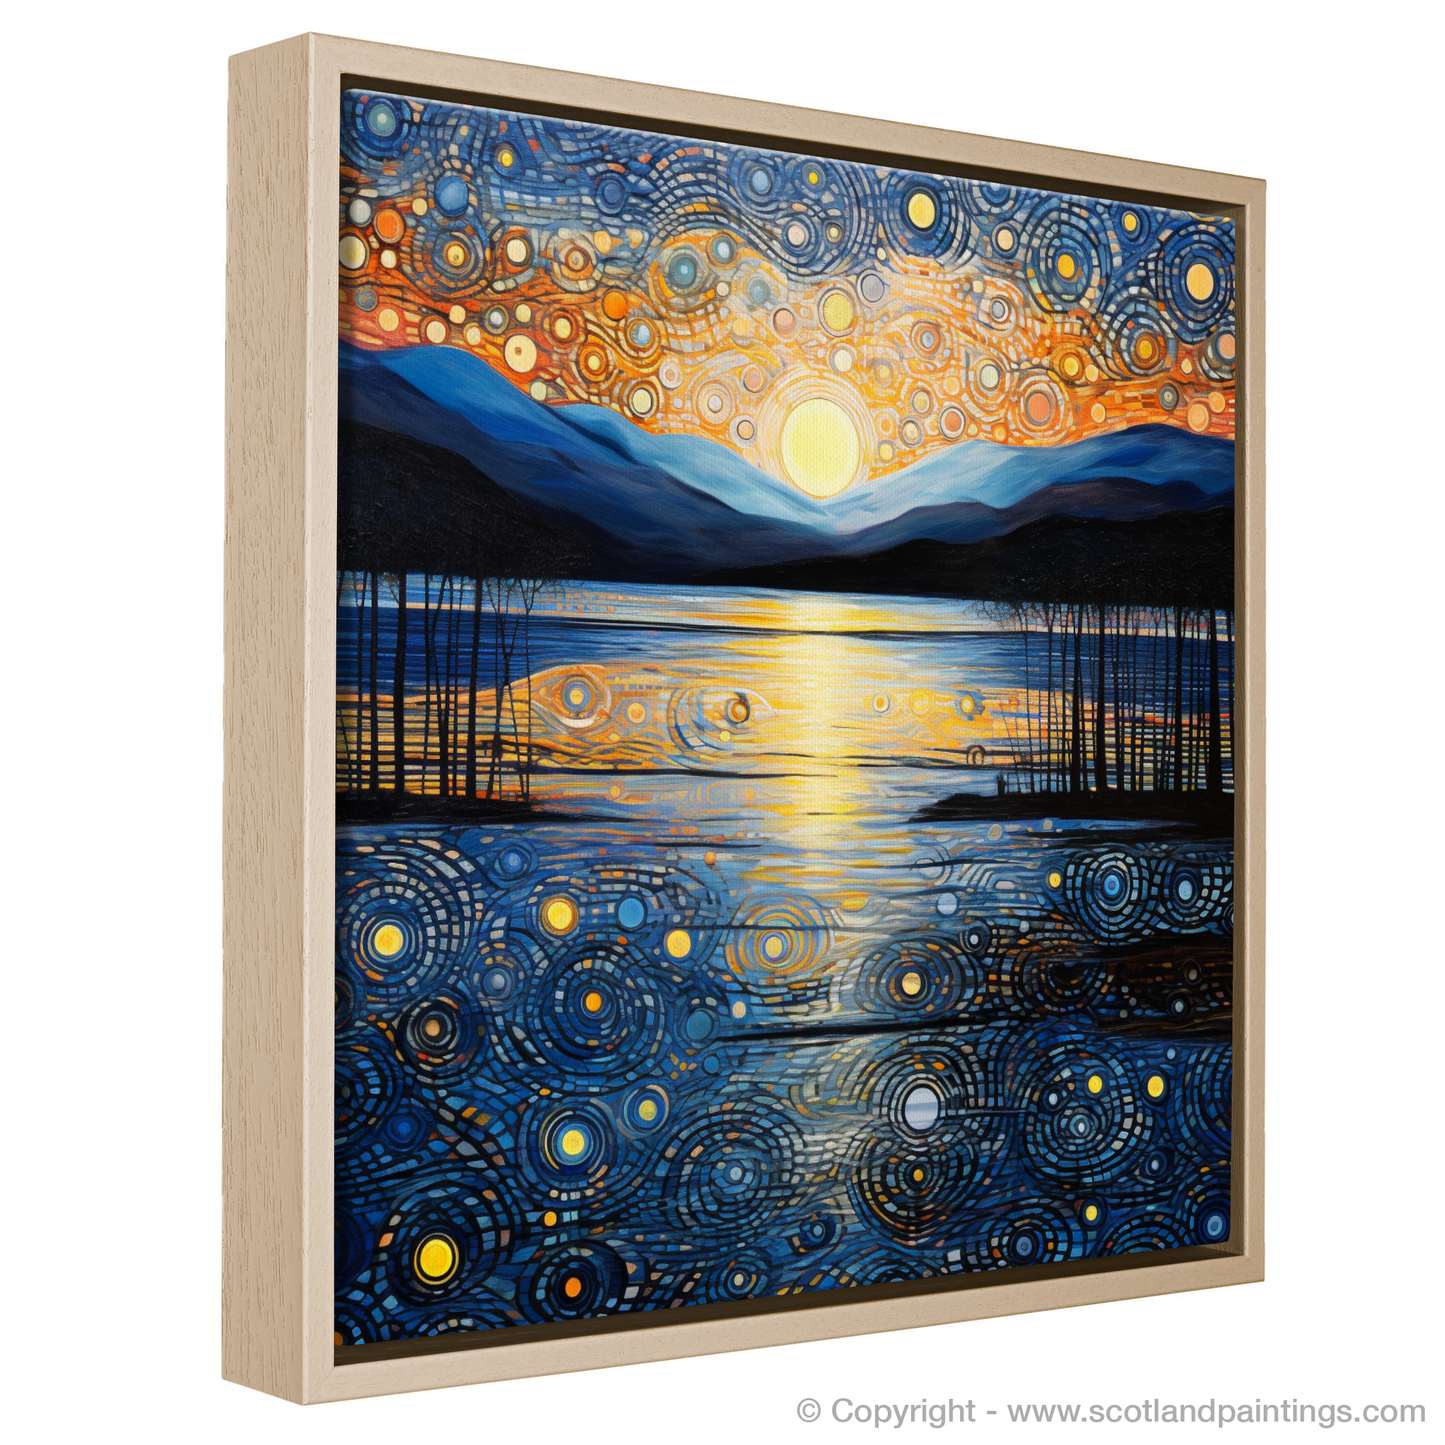 Painting and Art Print of Twilight reflections on Loch Lomond entitled "Twilight Reflections on Loch Lomond: An Abstract Expressionist Masterpiece".